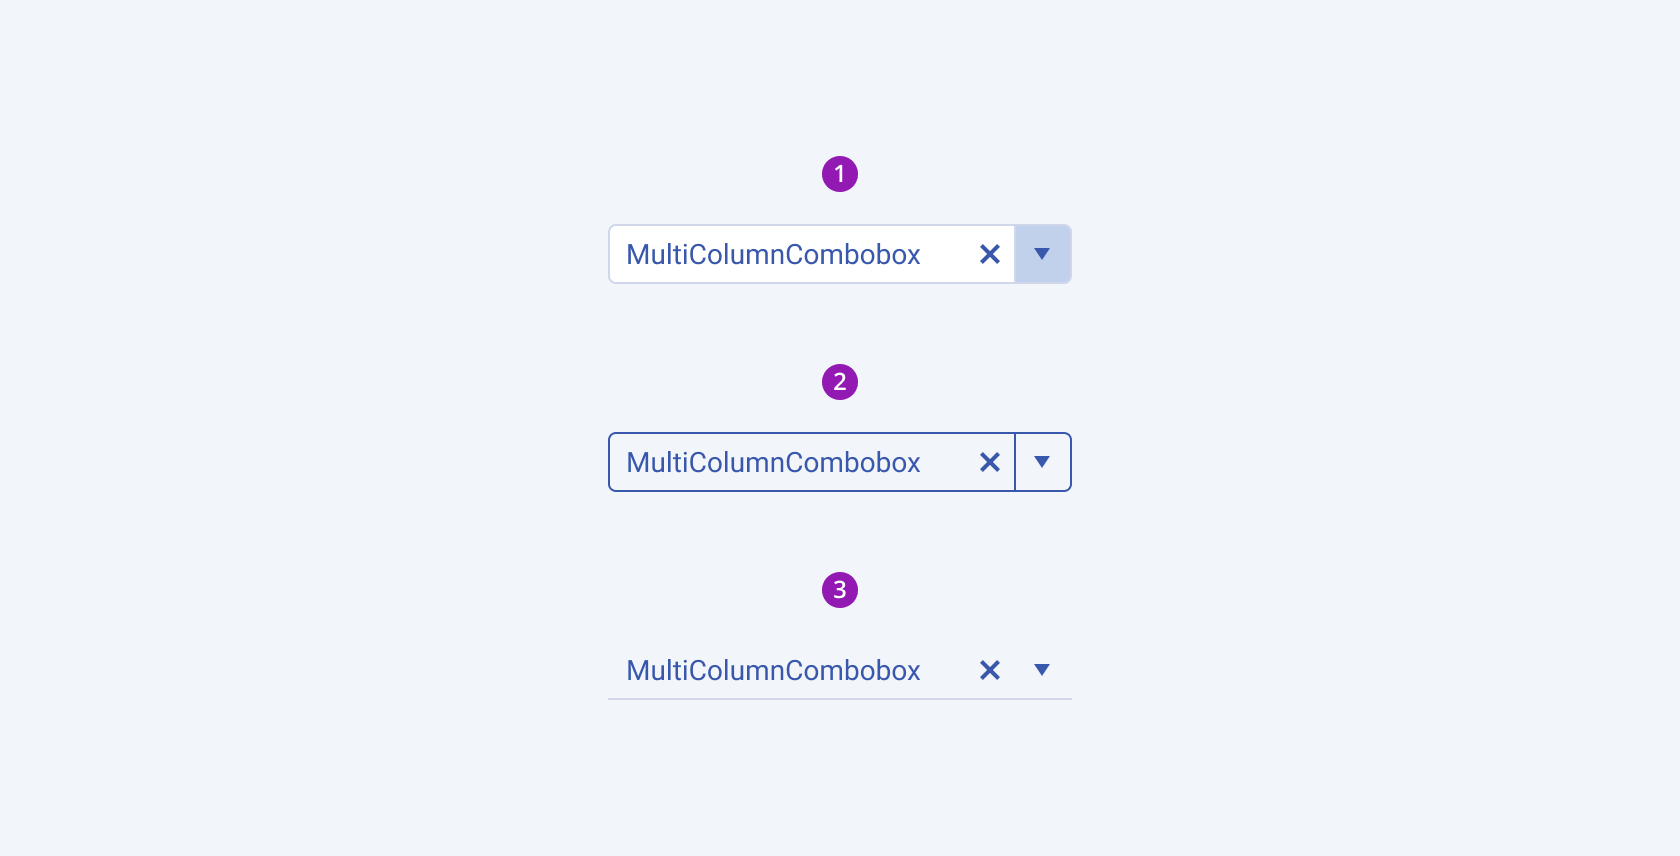 Three Telerik and Kendo UI MultiColumnComboBox components demonstrating the solid, outline, and flat fill modes respectively.